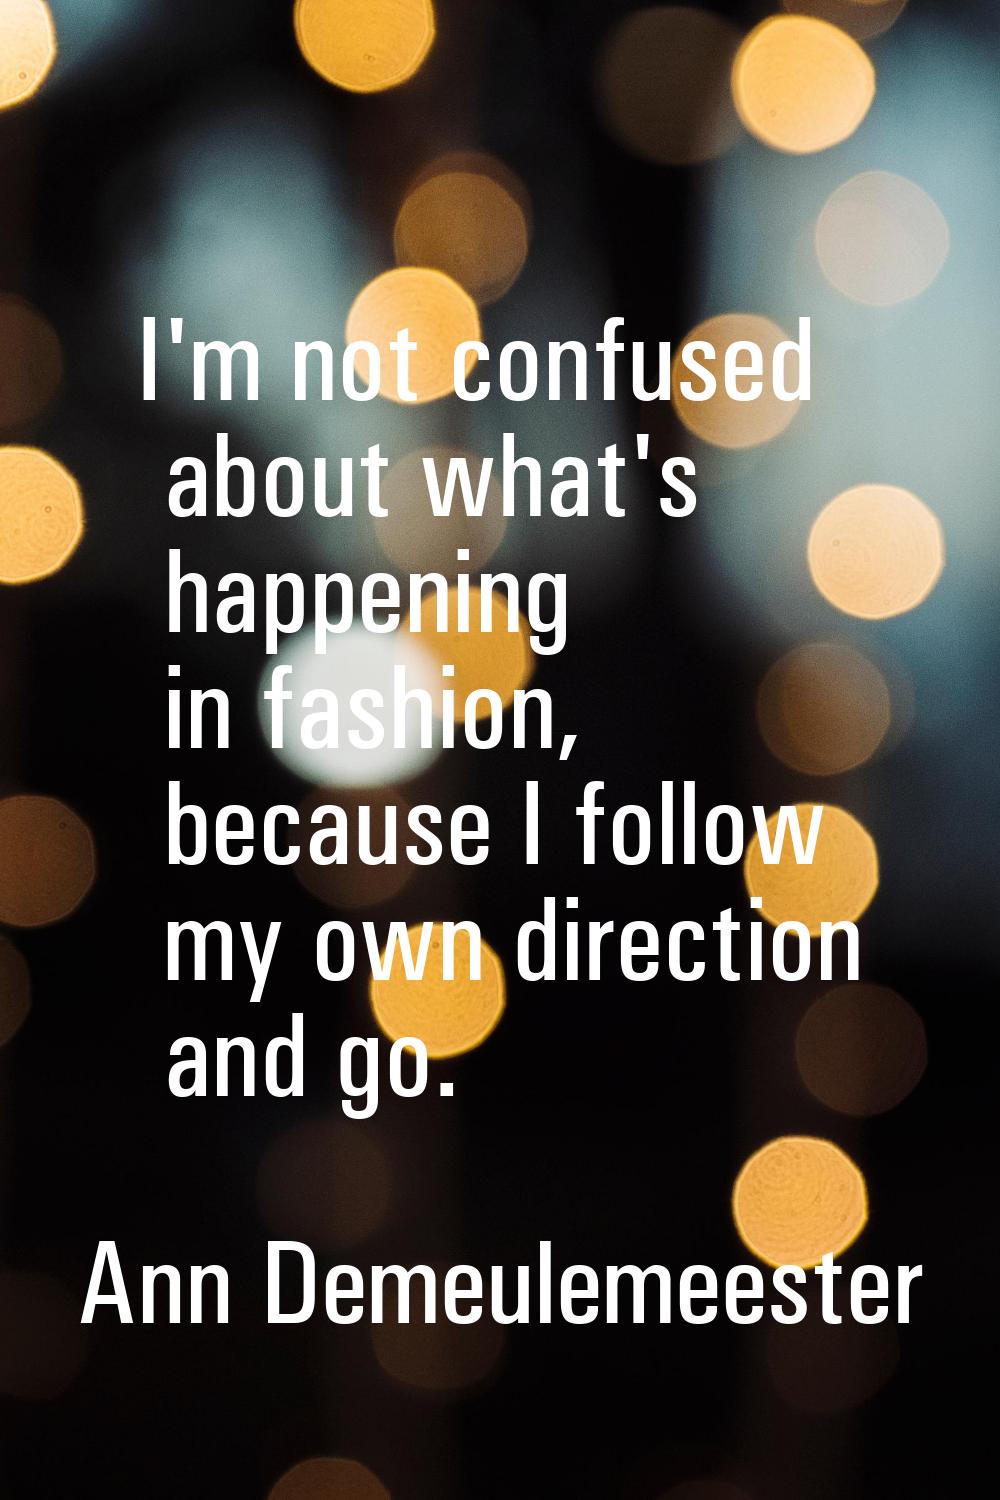 I'm not confused about what's happening in fashion, because I follow my own direction and go.